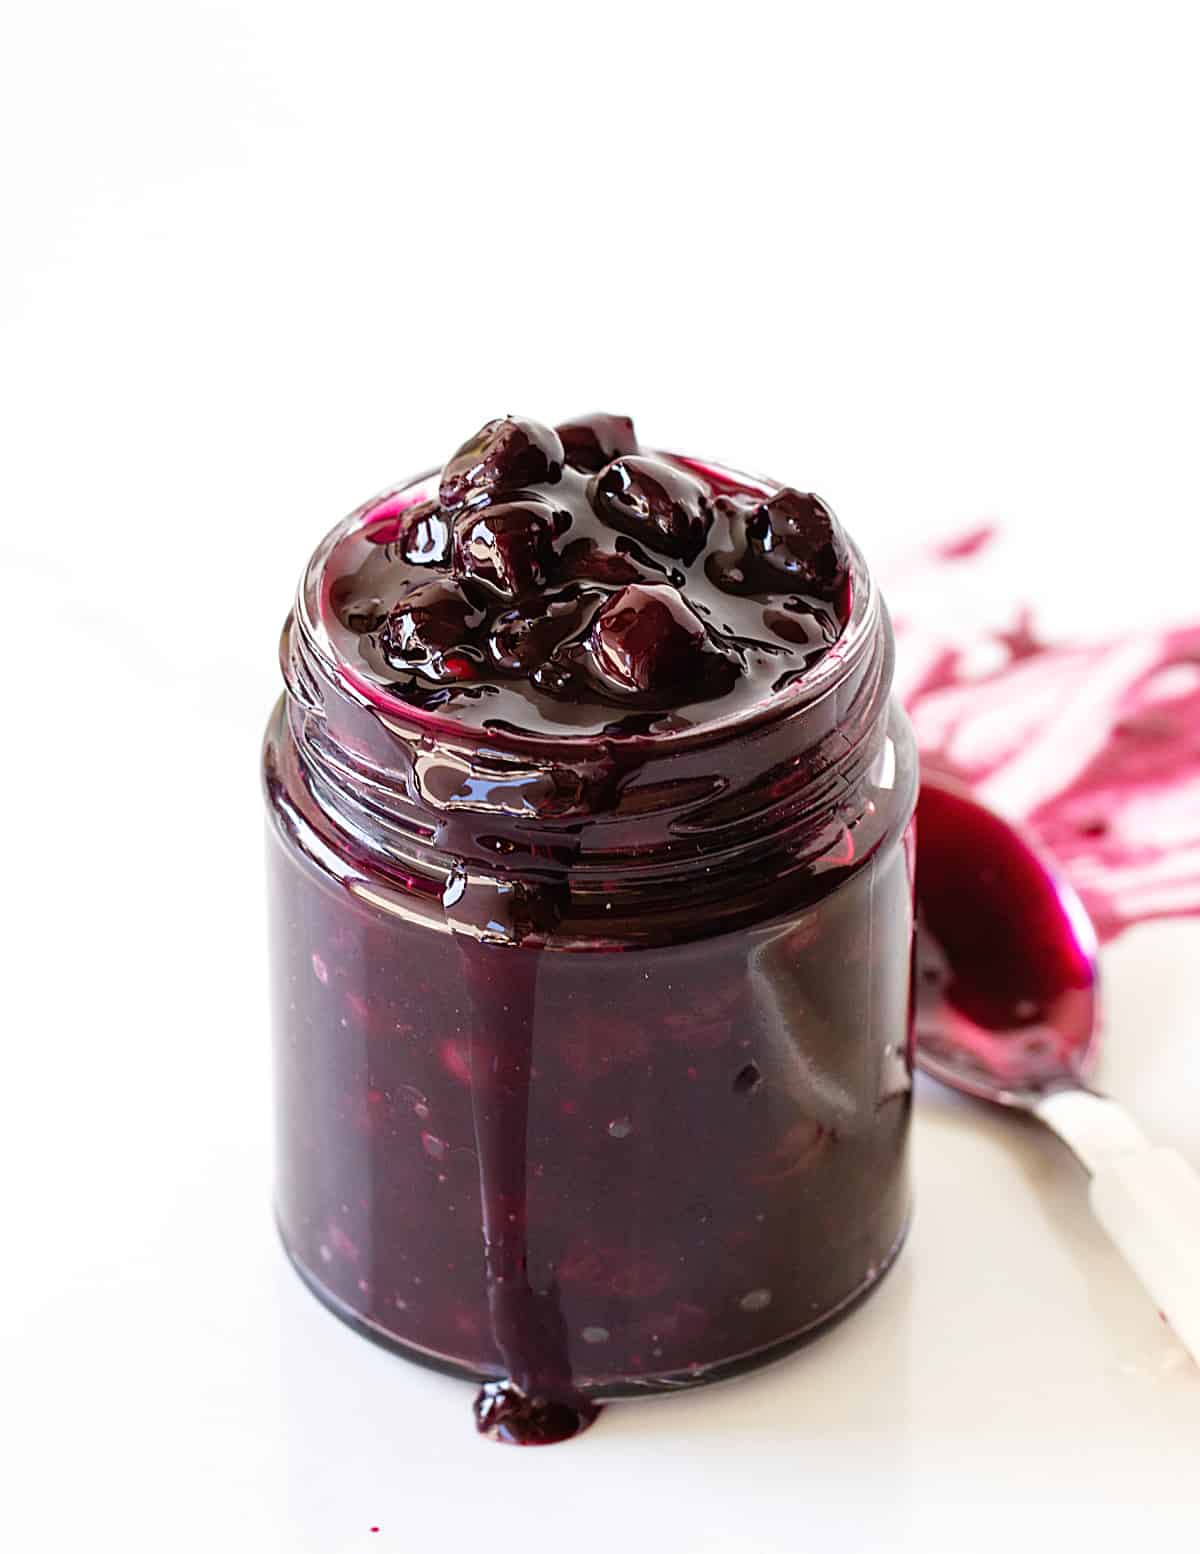 Glass jar with blueberry sauce, drip and spoon, white background